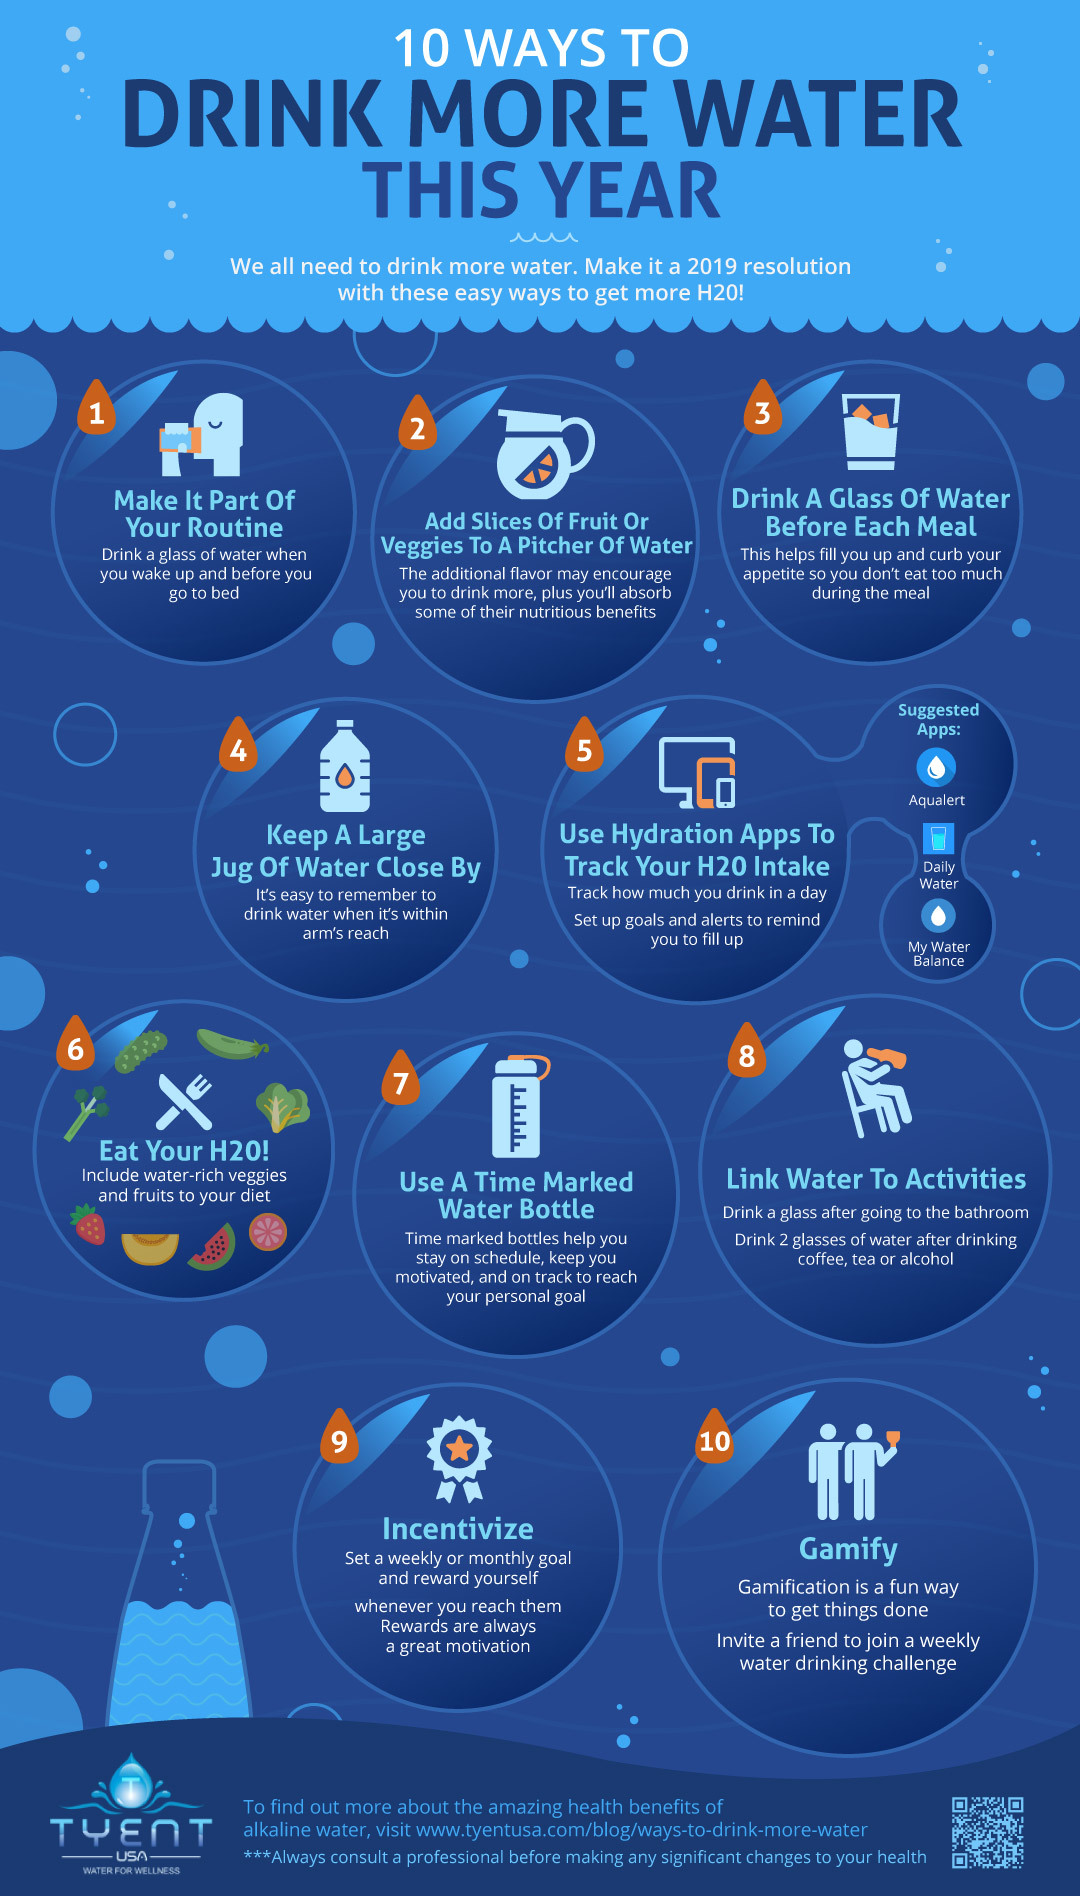 10-ways-to-drink-more-water-this-year-infographic